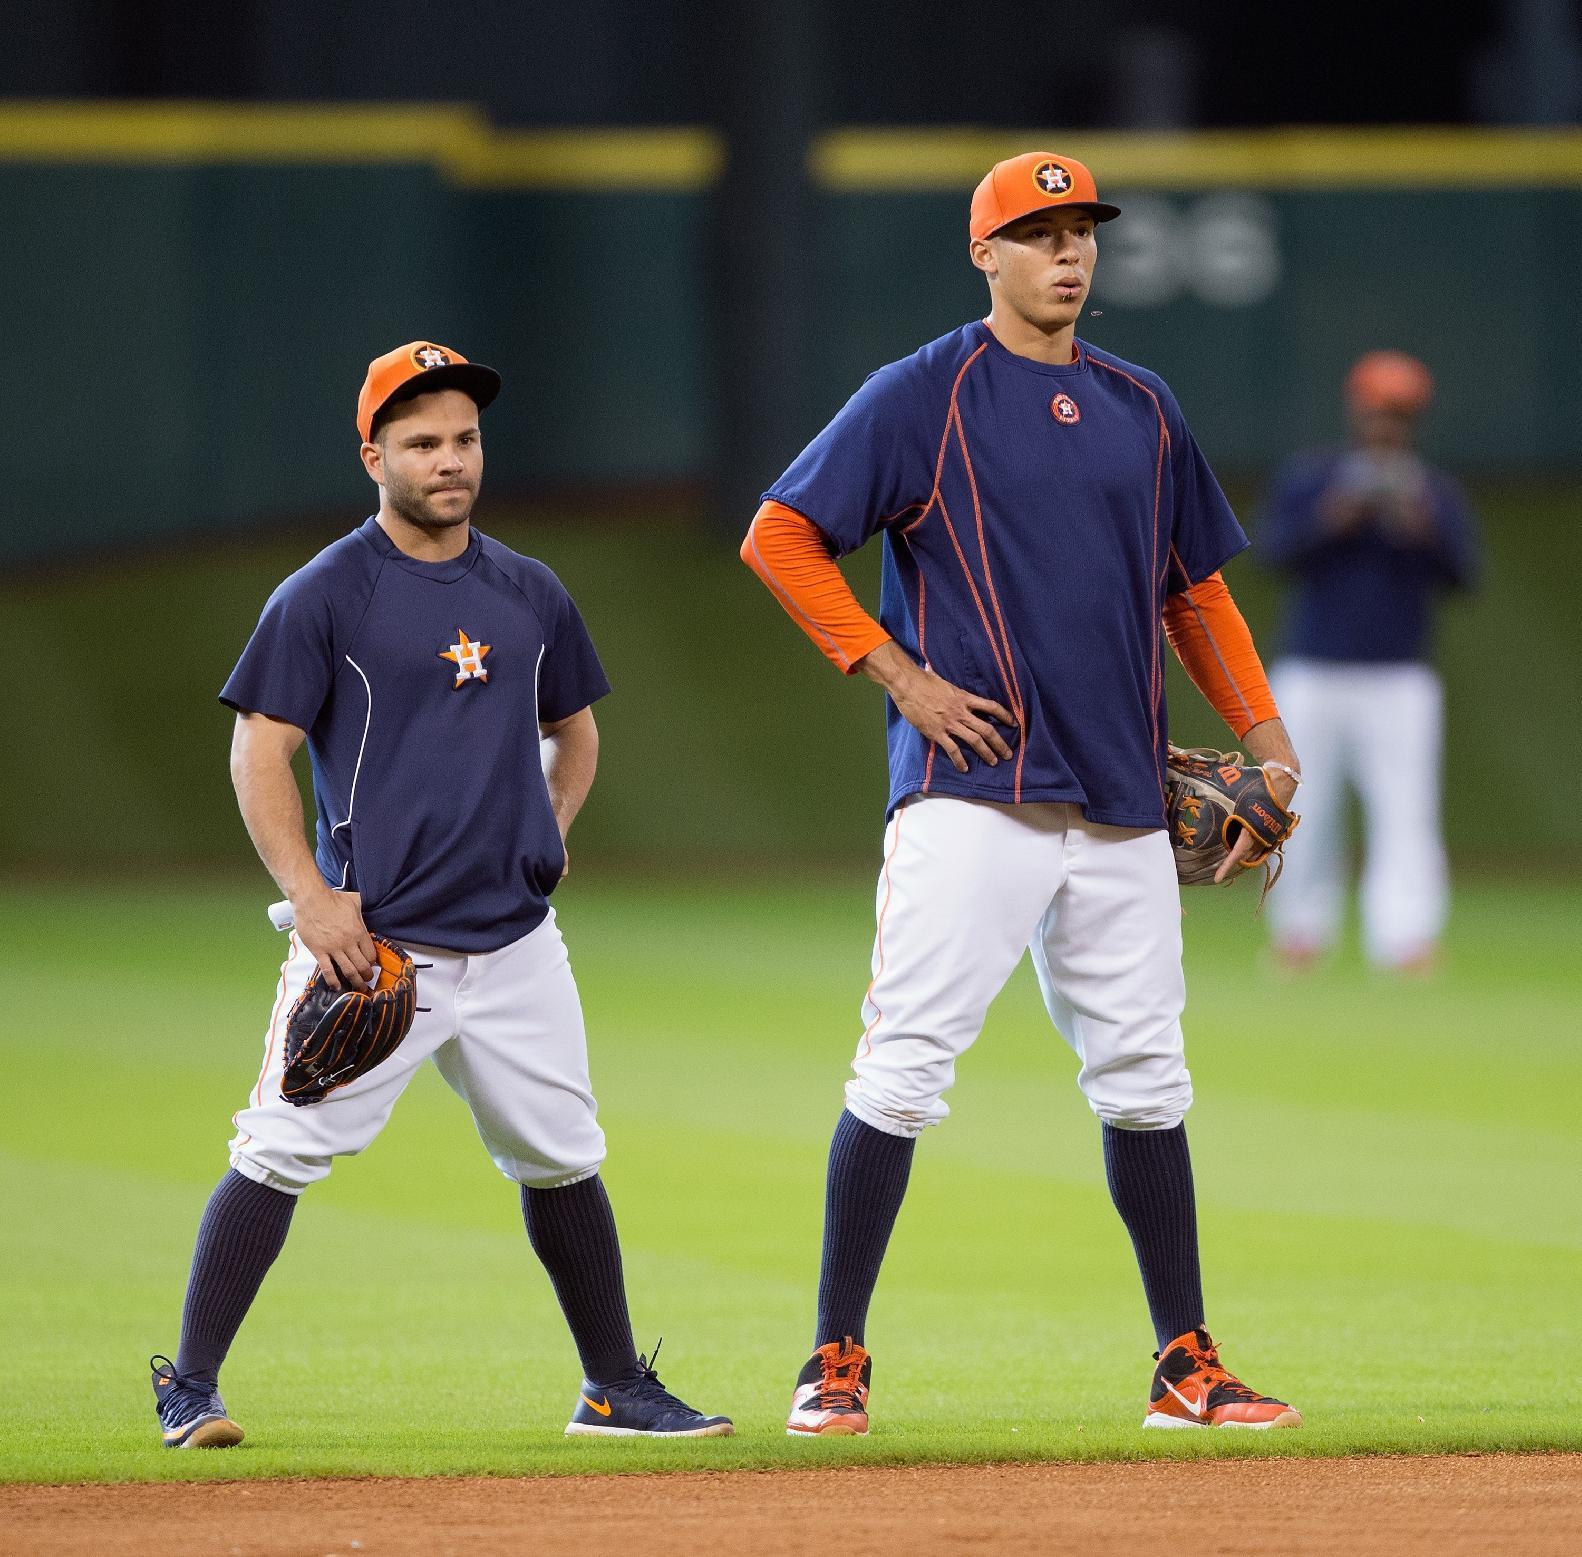 Jose Altuve, left, has assumed the role of big brother to Carlos Correa. (Getty Images)